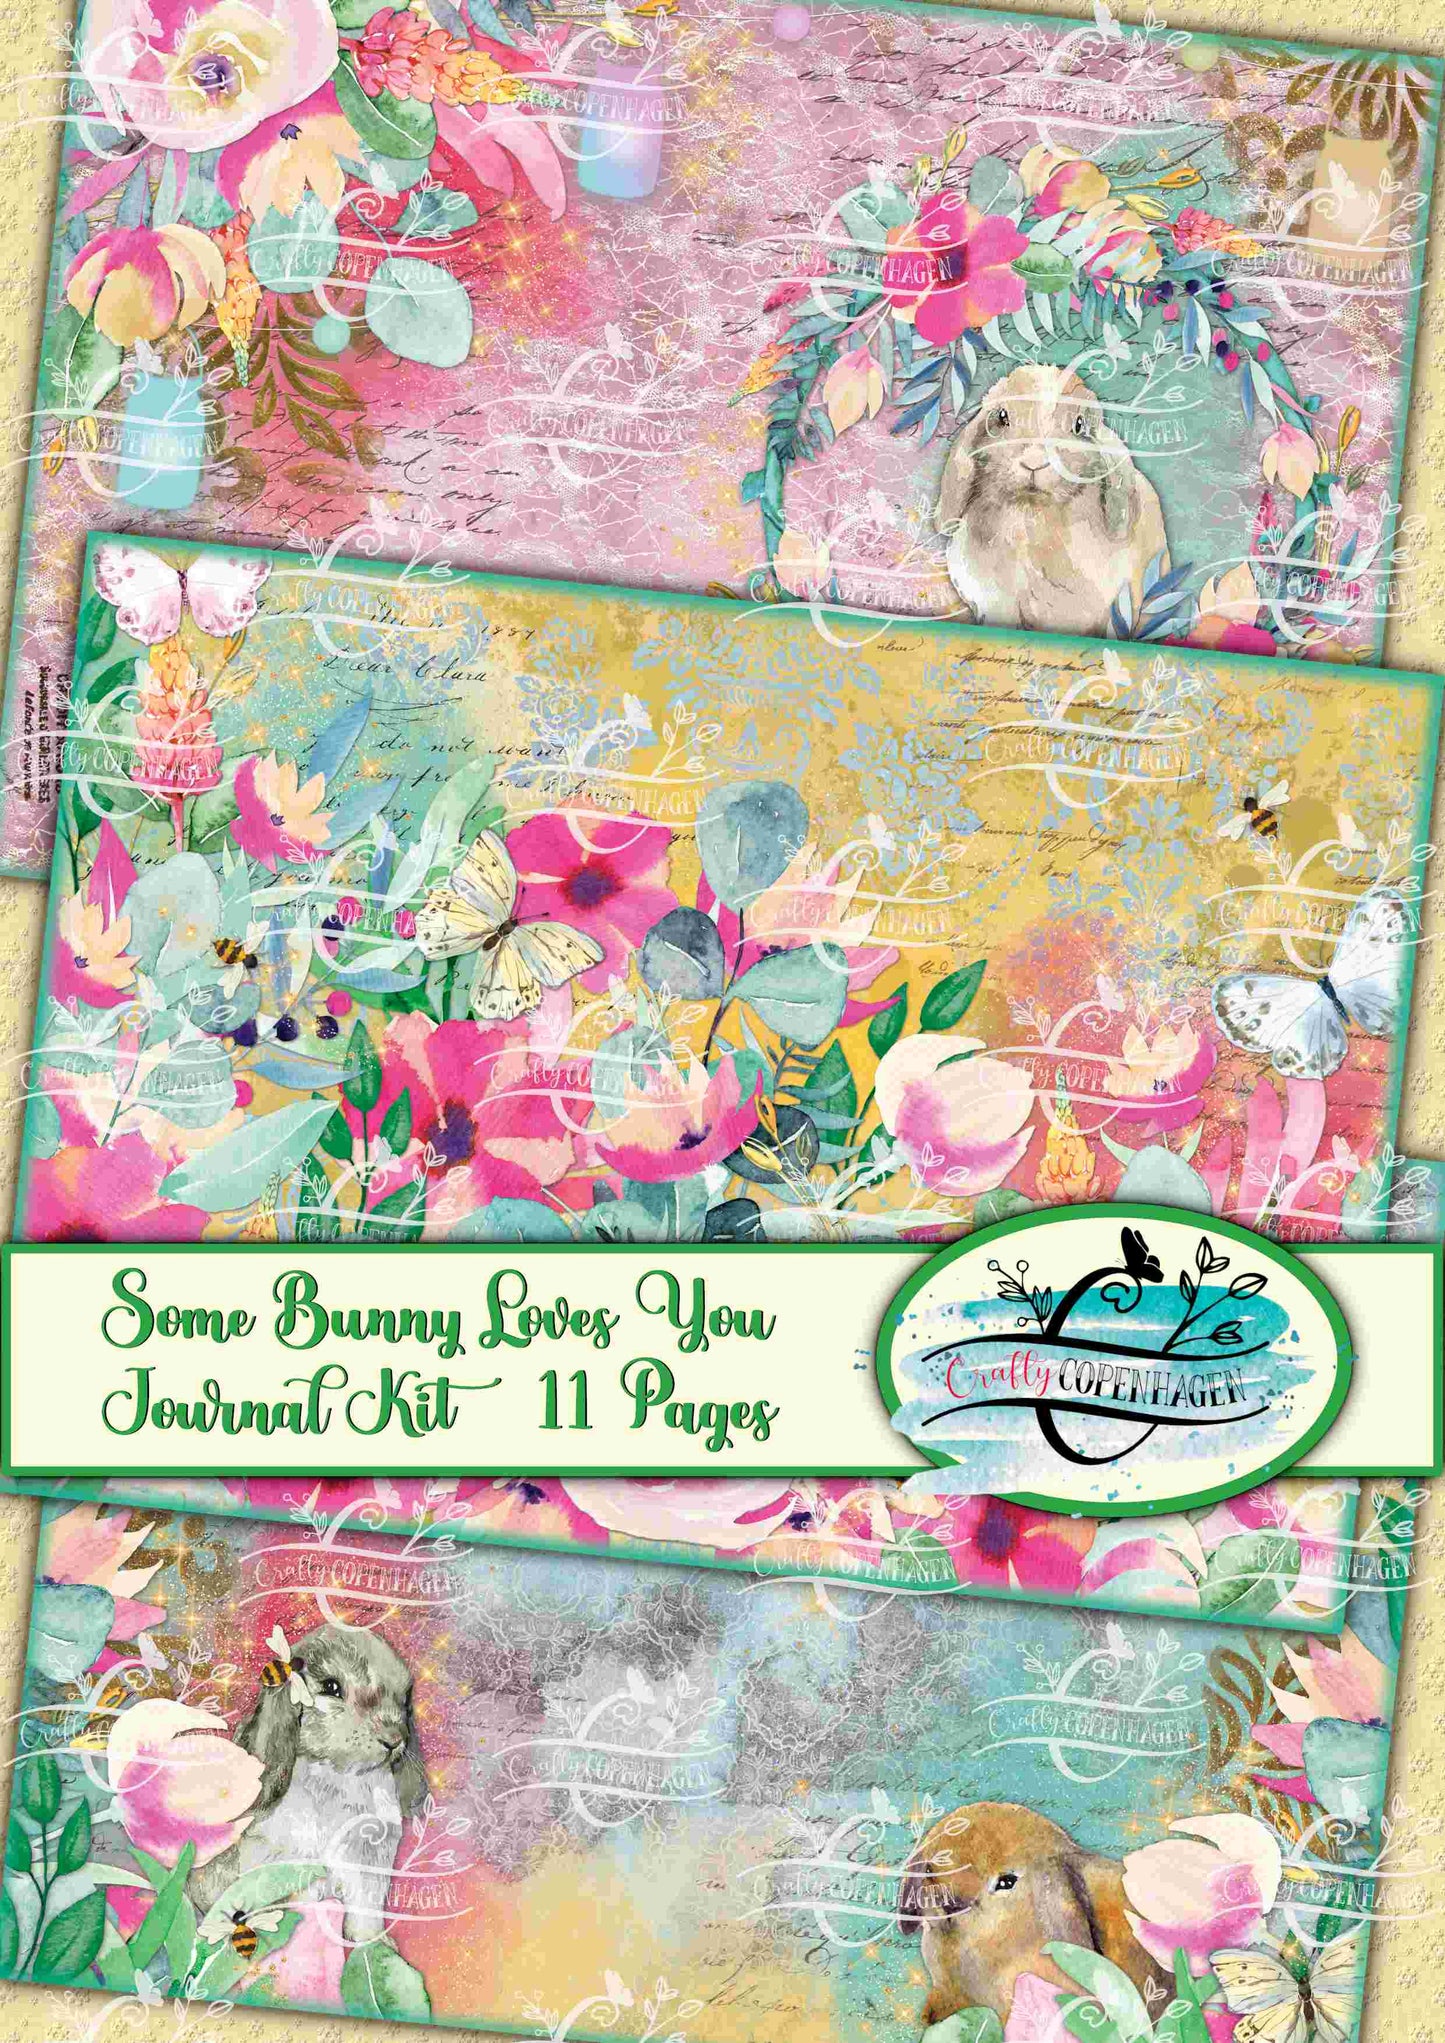 Scrapbook Kit Review & Crafting A Summer Junk Journal Page 